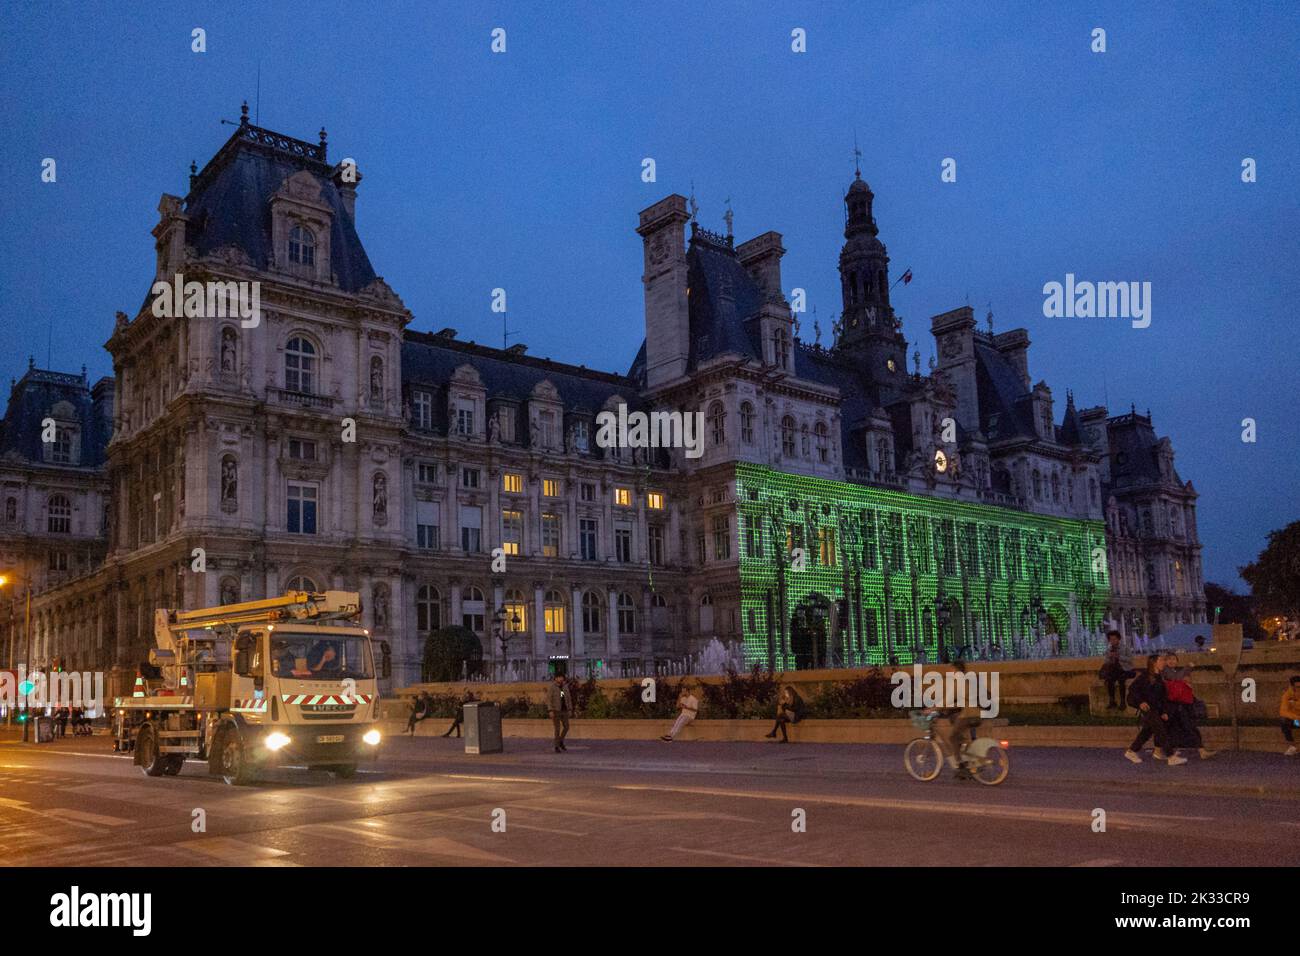 the City Hall of Paris and Rue de Rivoli, with one truck, at dawn, with people walking and a laser show is projected on the facade of the City Hall Stock Photo